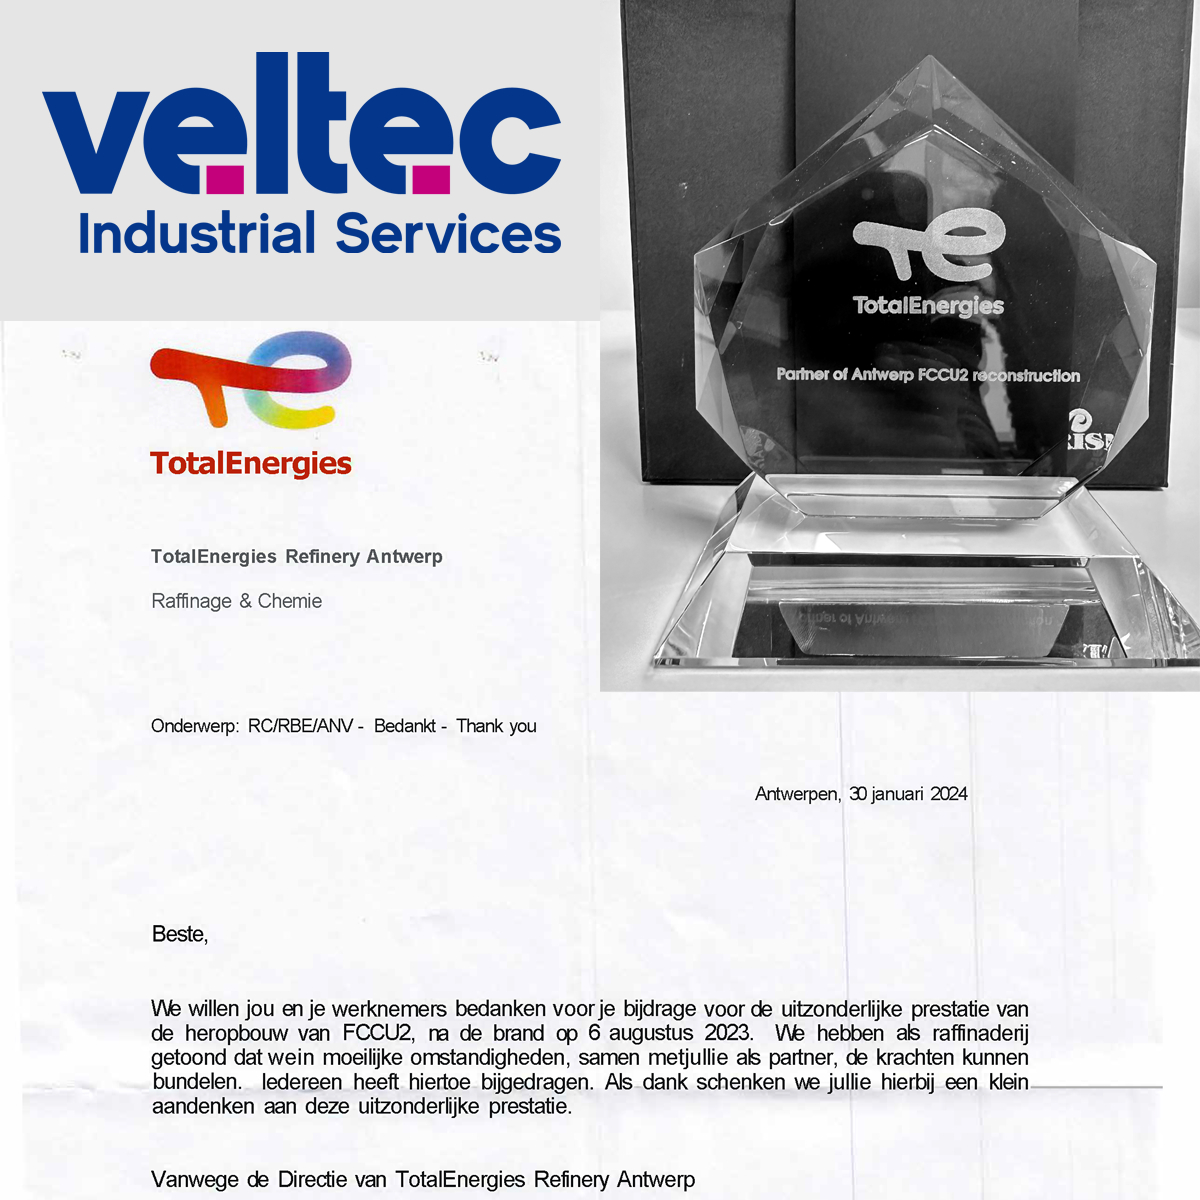 Veltec NV receives thank you award from TotalEnergies Antwerp refinery